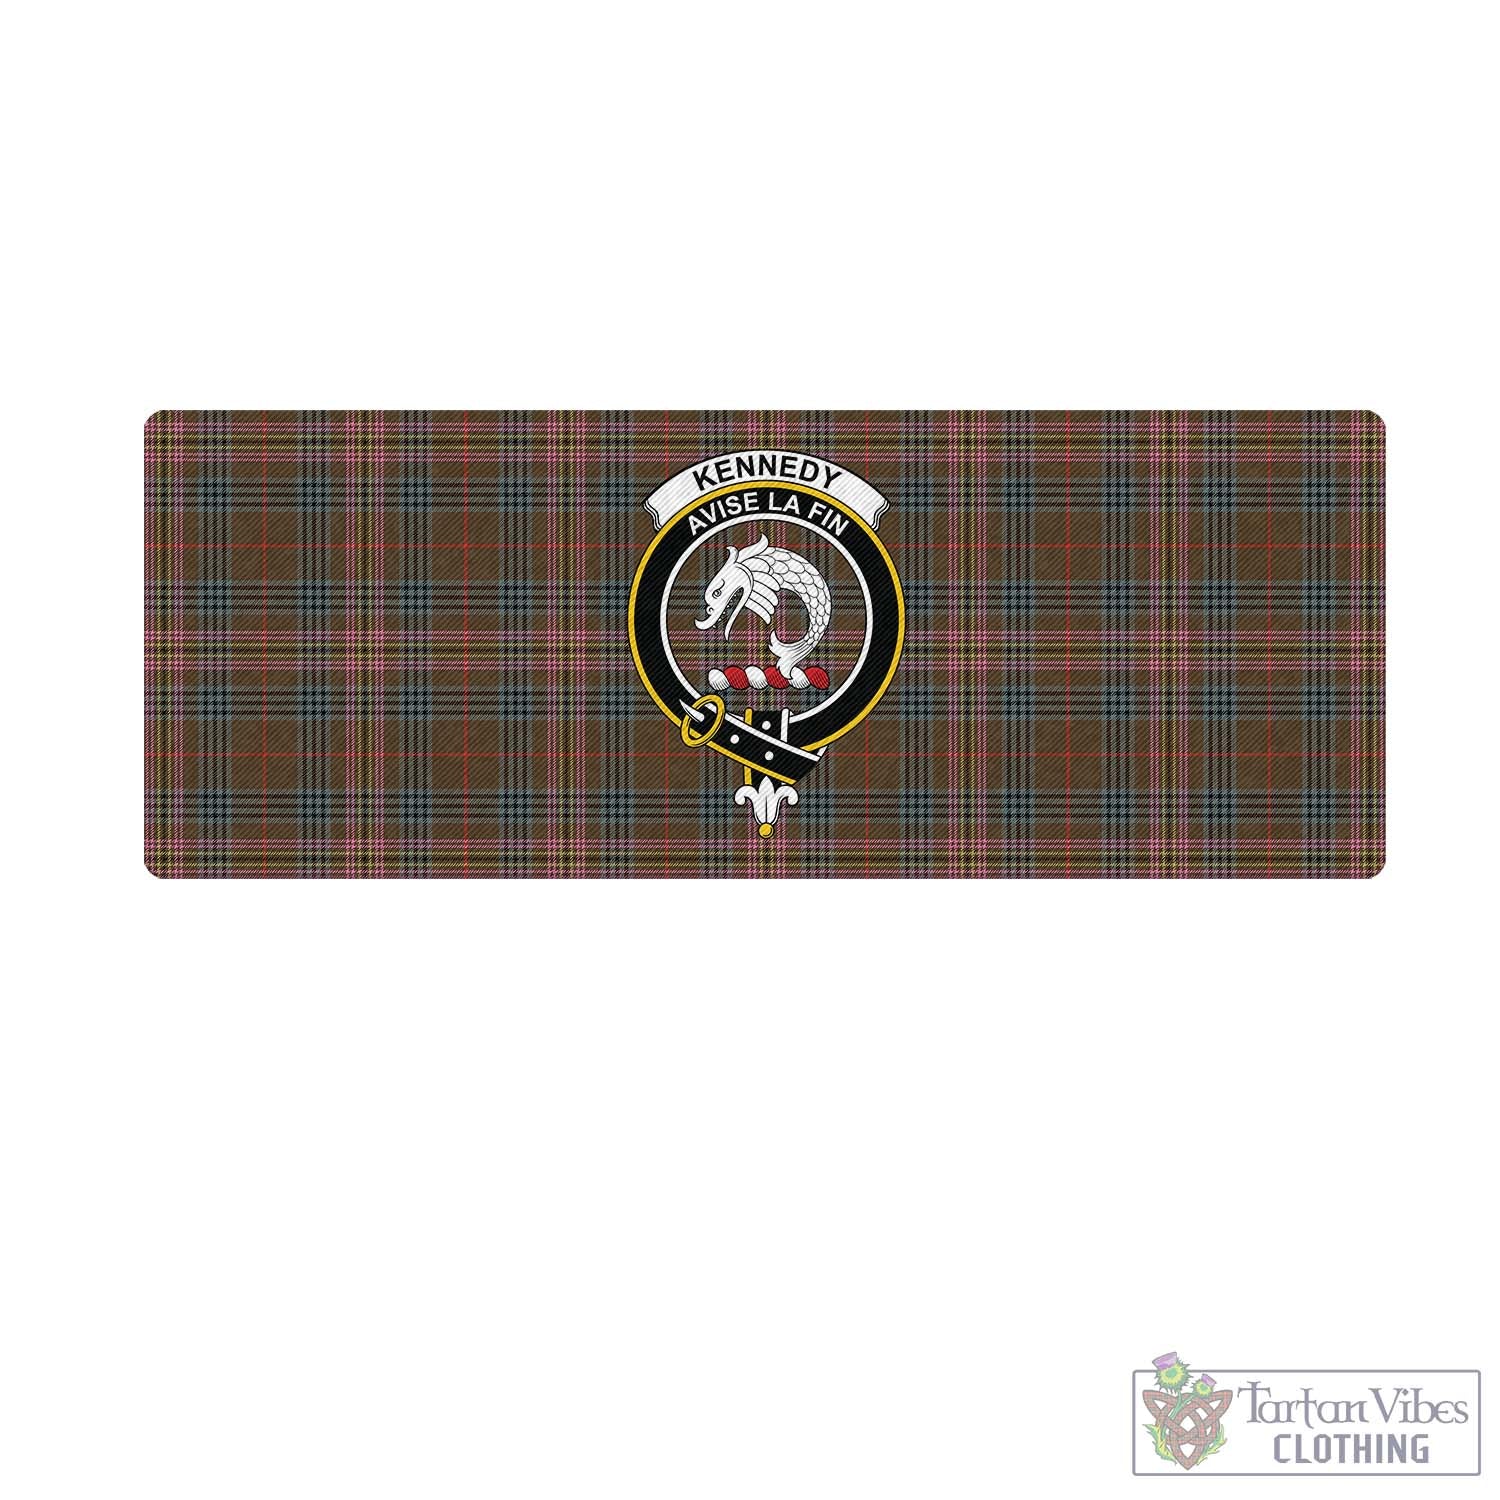 Tartan Vibes Clothing Kennedy Weathered Tartan Mouse Pad with Family Crest